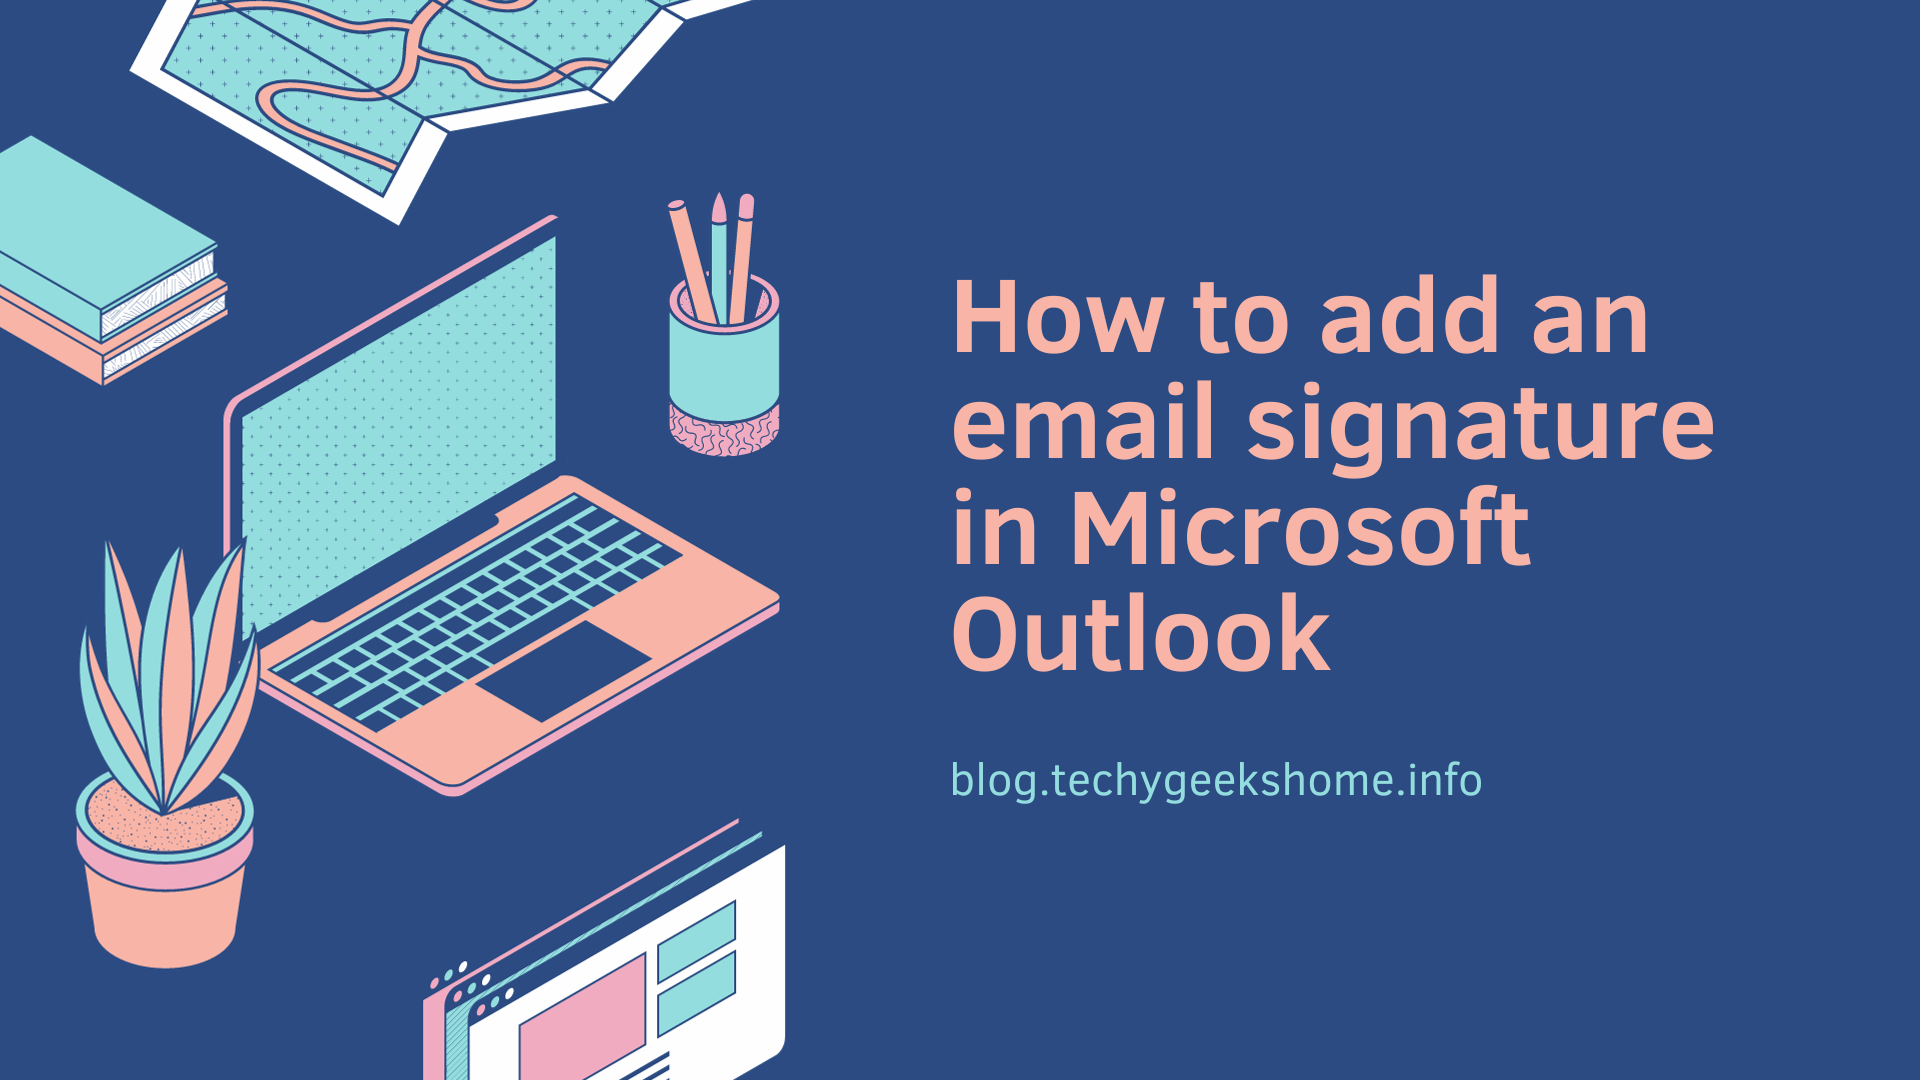 How to add an email signature in Microsoft Outlook